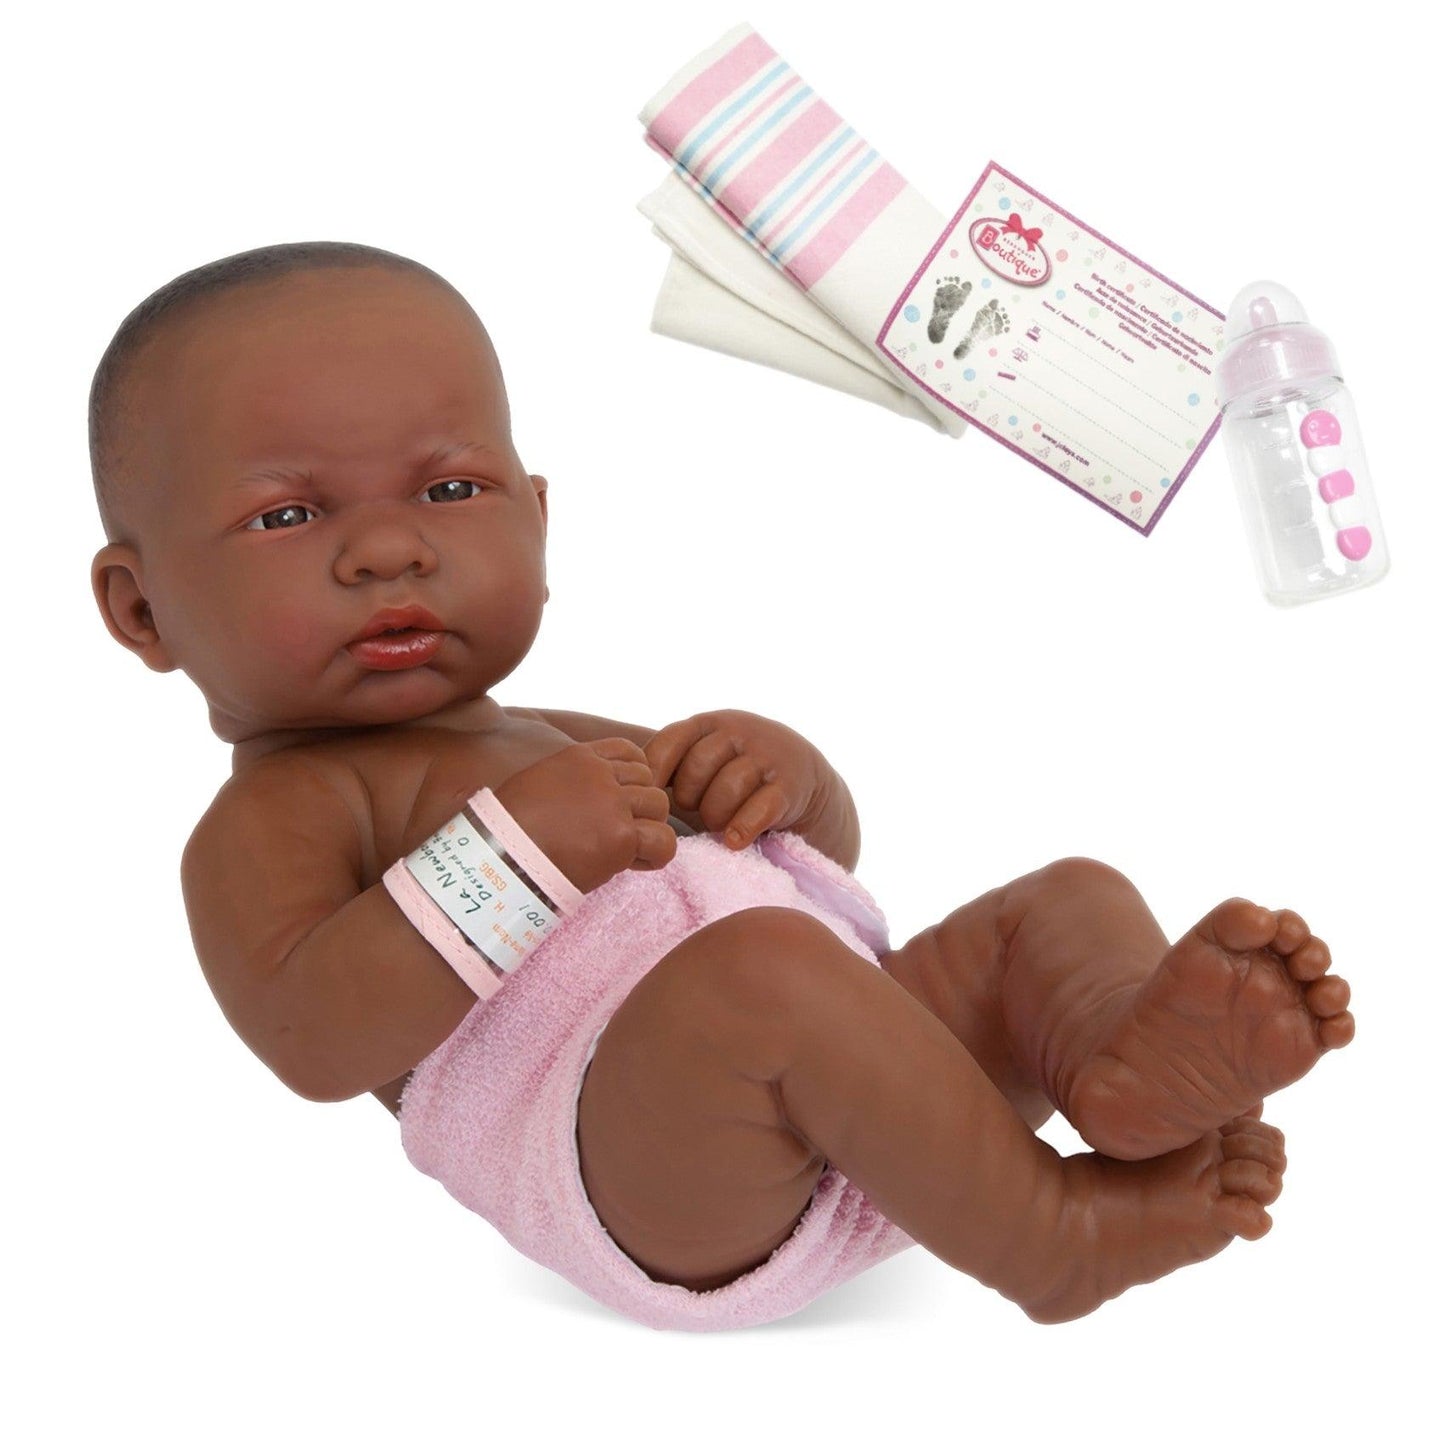 La Newborn African American "First Day" 14" Real Girl - JC Toys Group Inc.